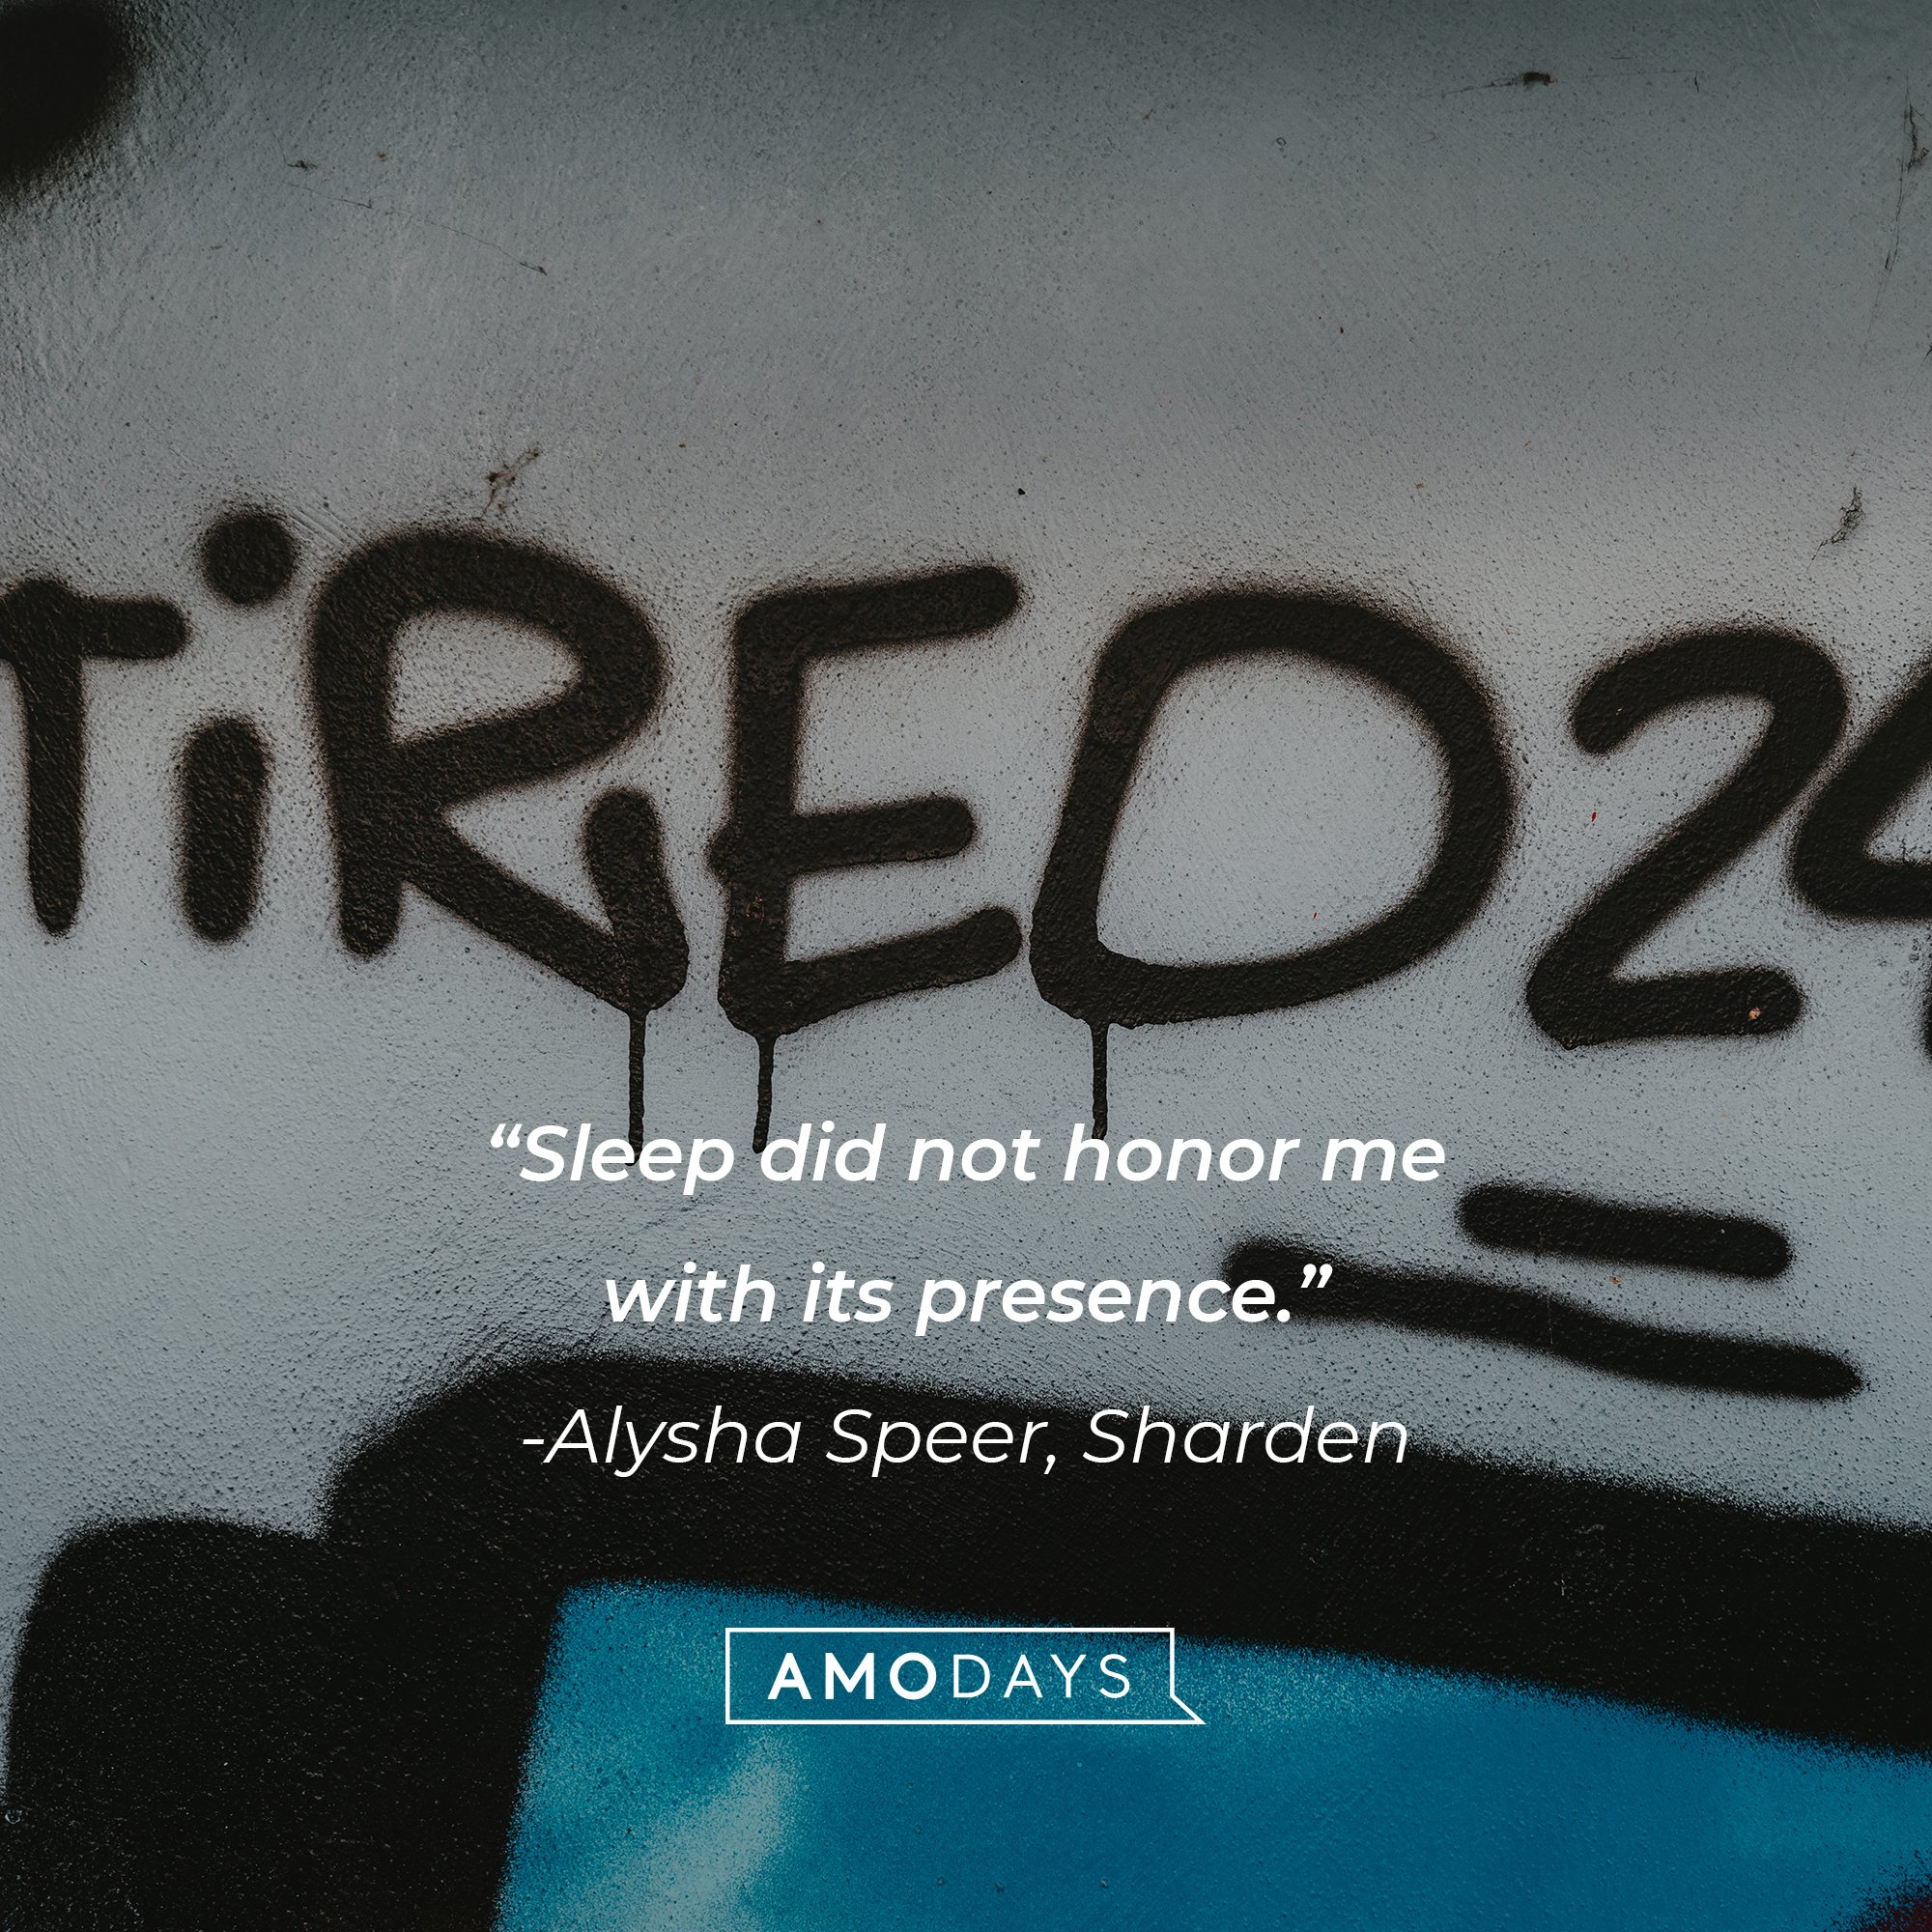 Alysha Speer, Sharden's quote: "Sleep did not honor me with its presence." | Image: AmoDays